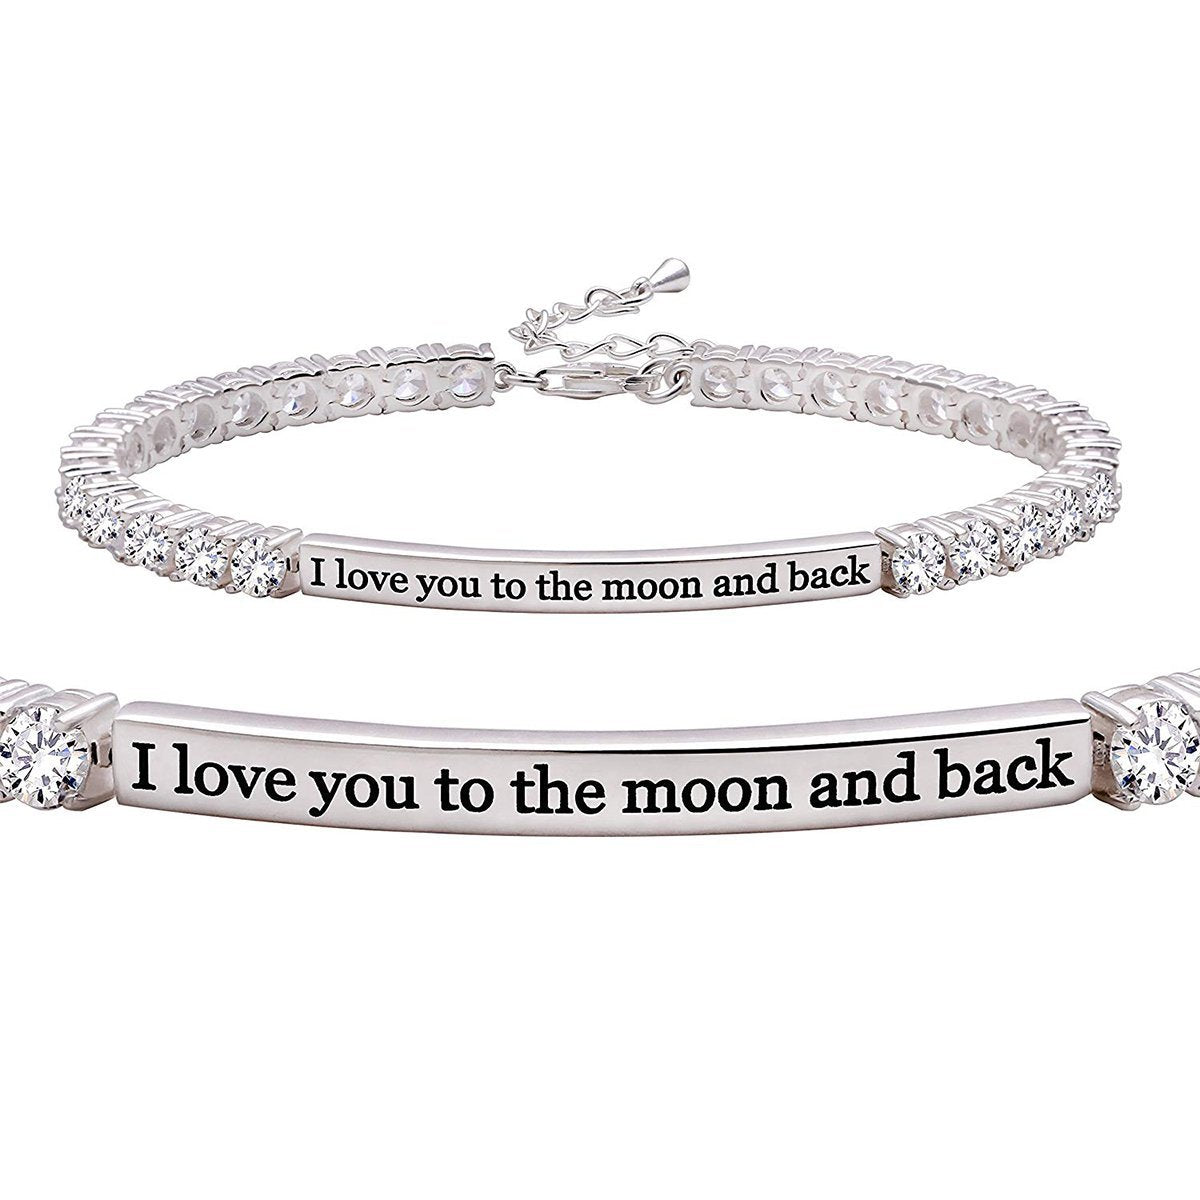 I Love You to the Moon and Back Bracelet